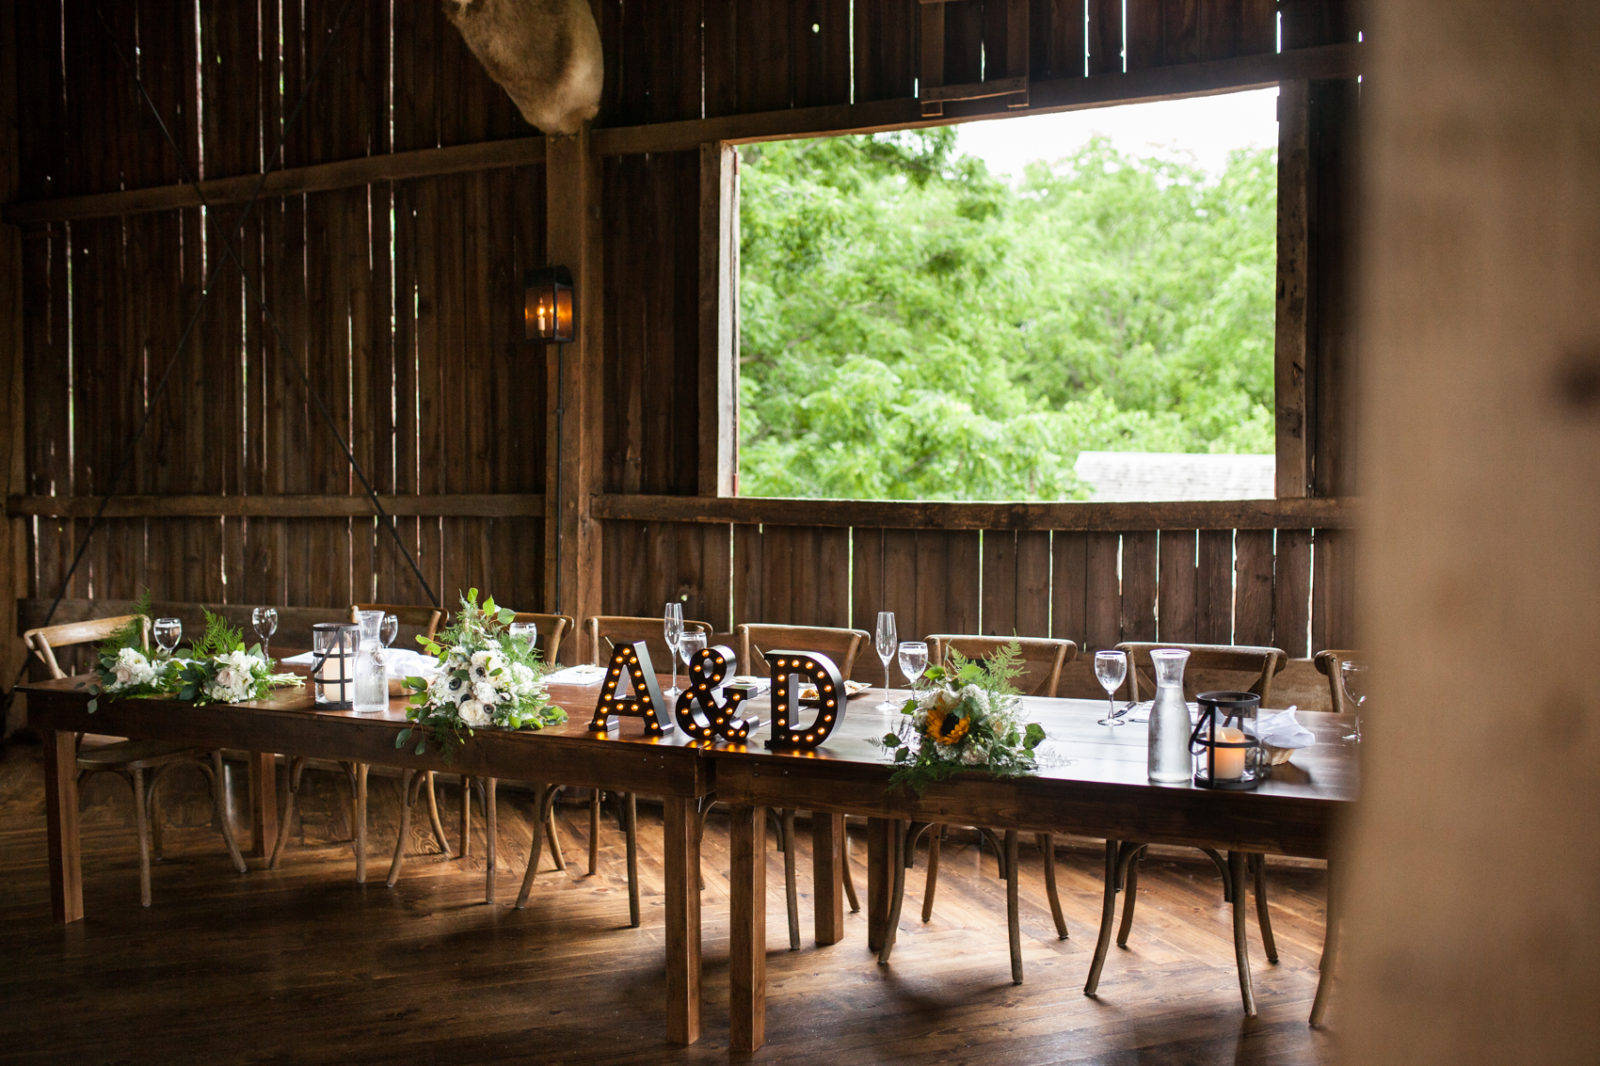 wedding reception in the barn of The Farm at Dover head table with marquee letters